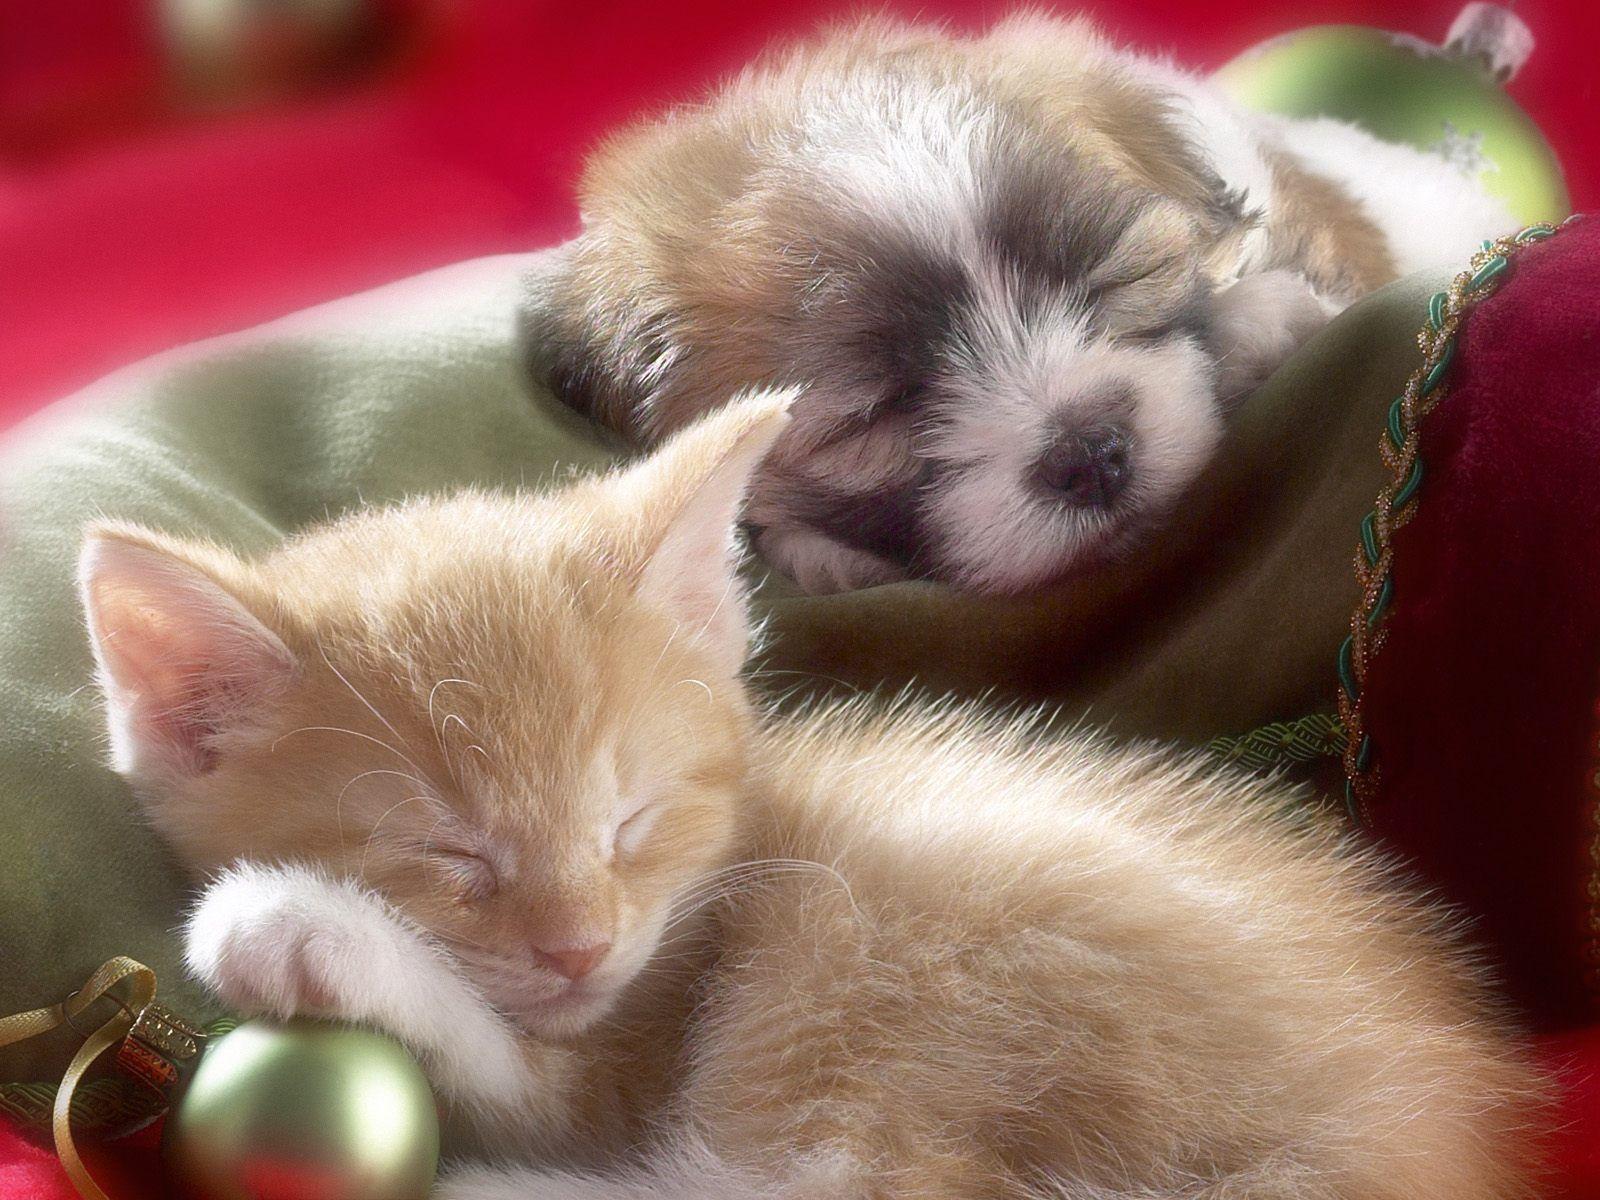 Christmas Puppy and Kitten Sleeping Wallpaper and Background Imagex1200